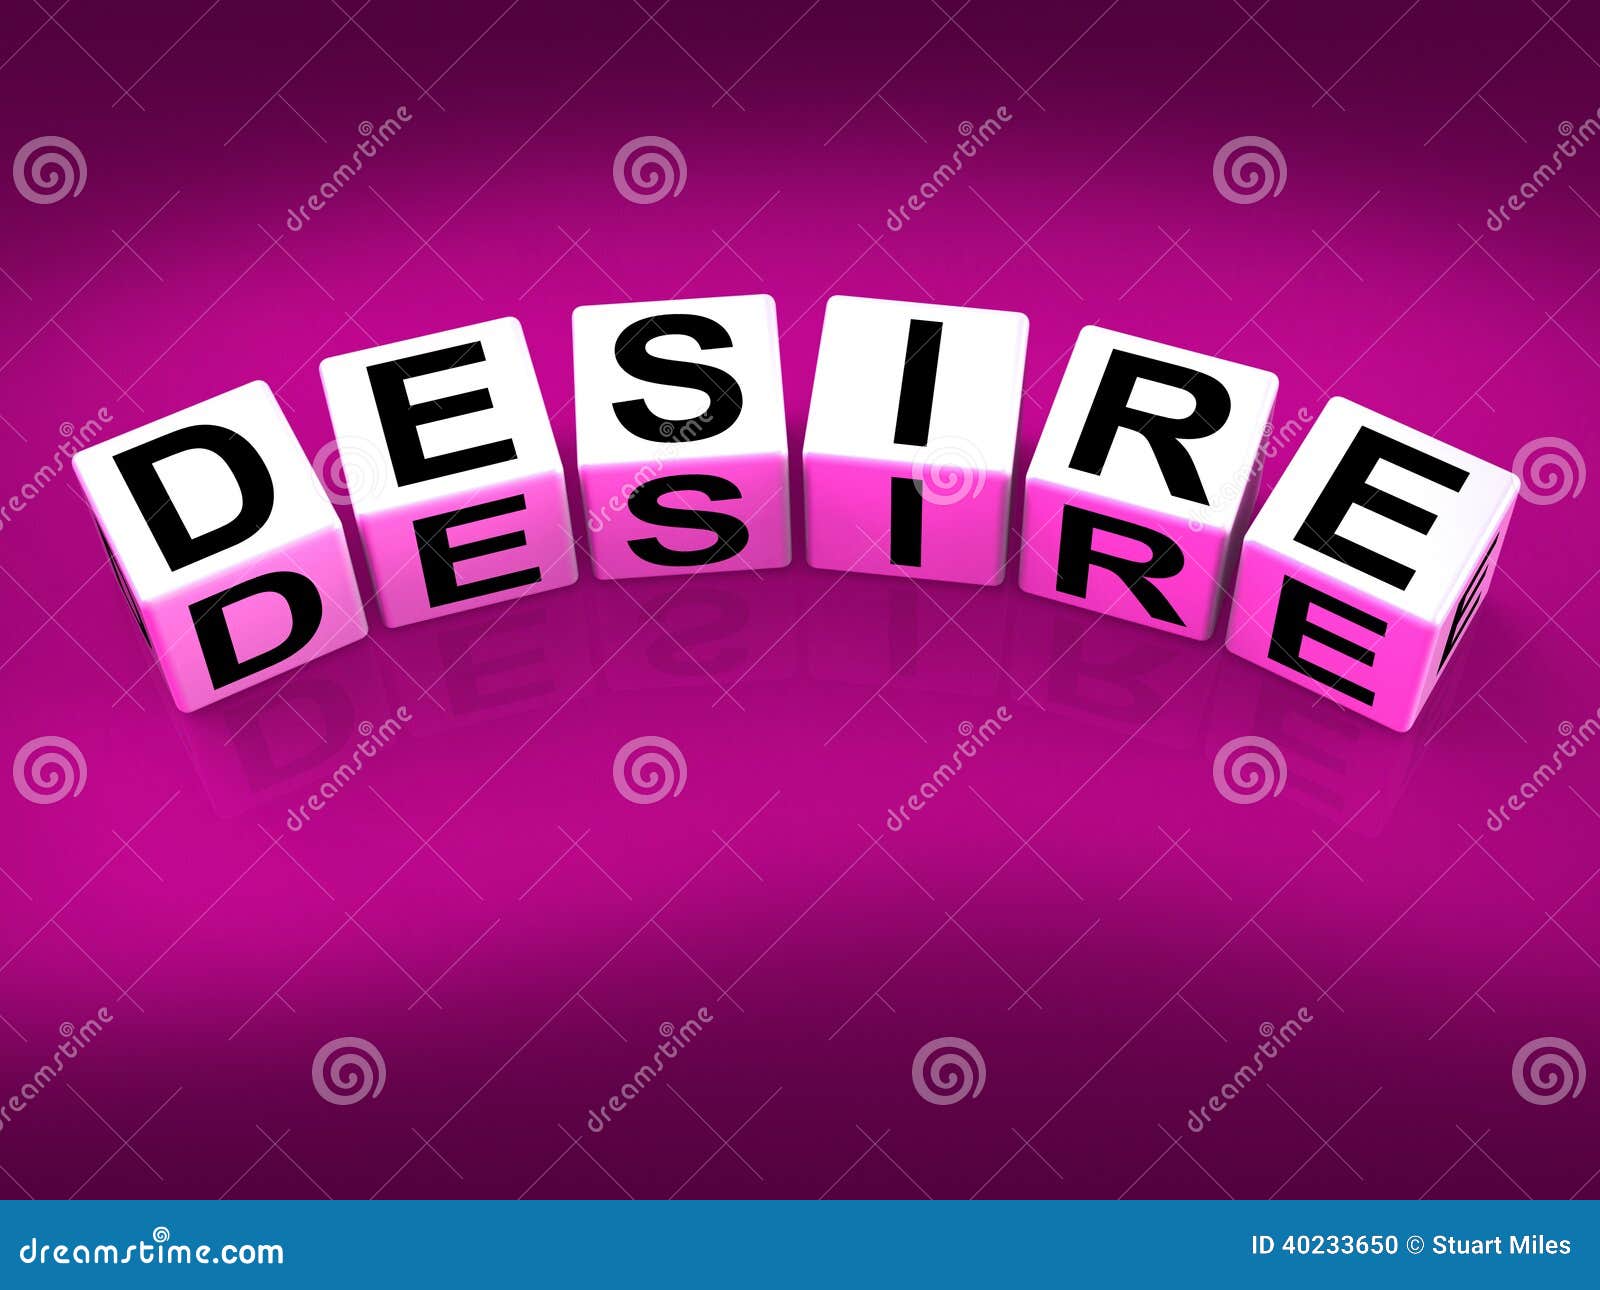 desire blocks show desires ambitions and